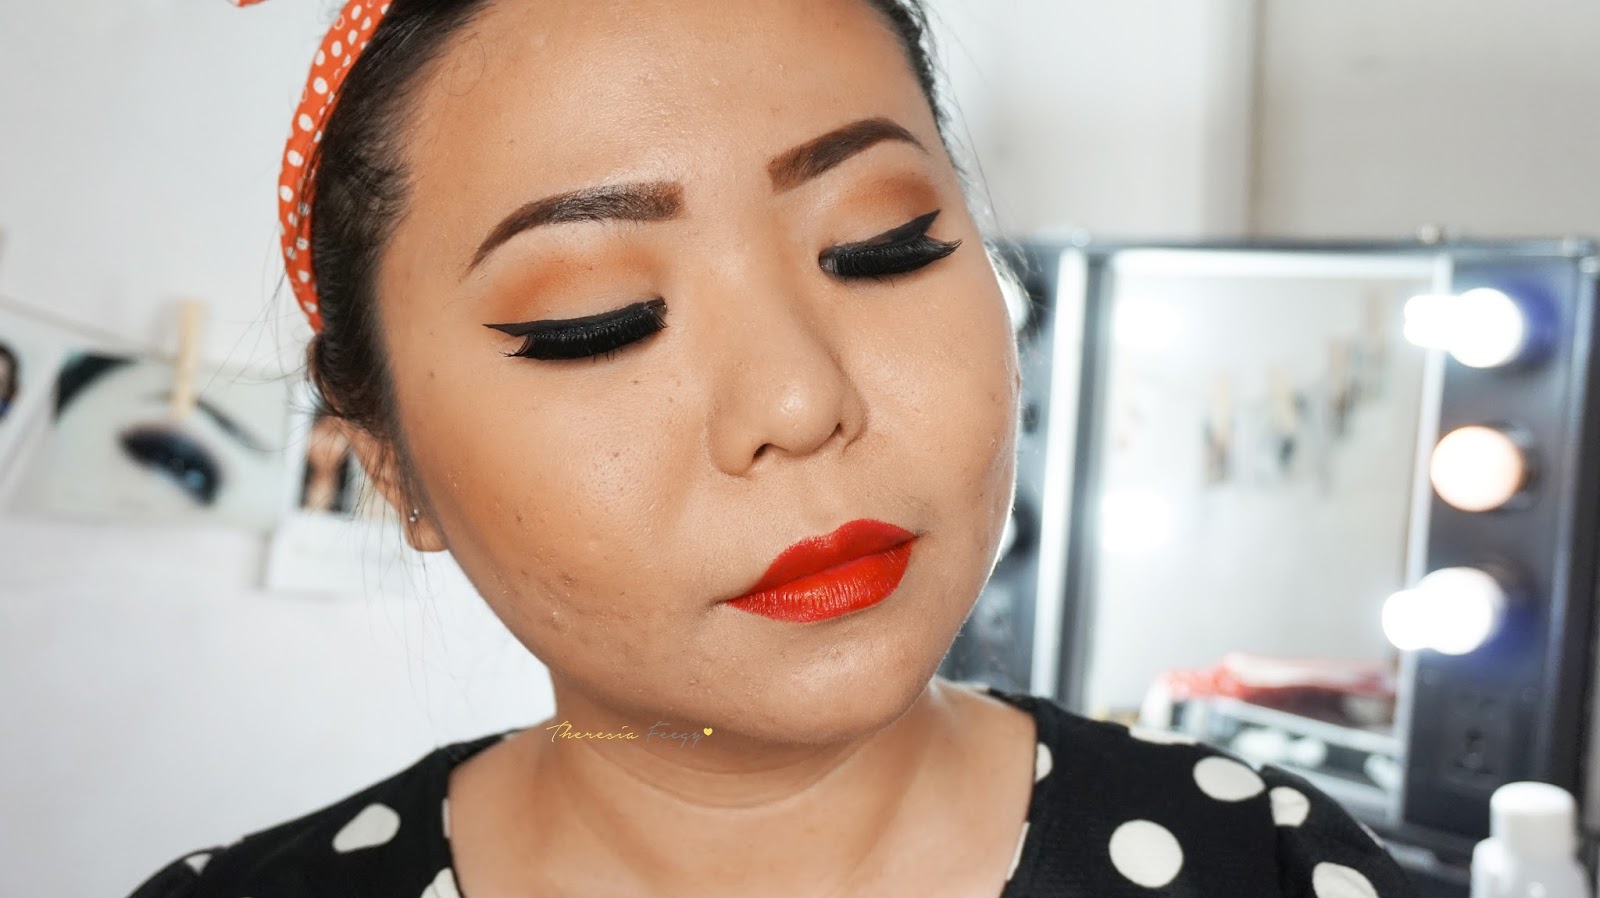 EASY AND QUICK PIN UP LOOK VINTAGE INSPIRED MAKEUP TUTORIAL WITH